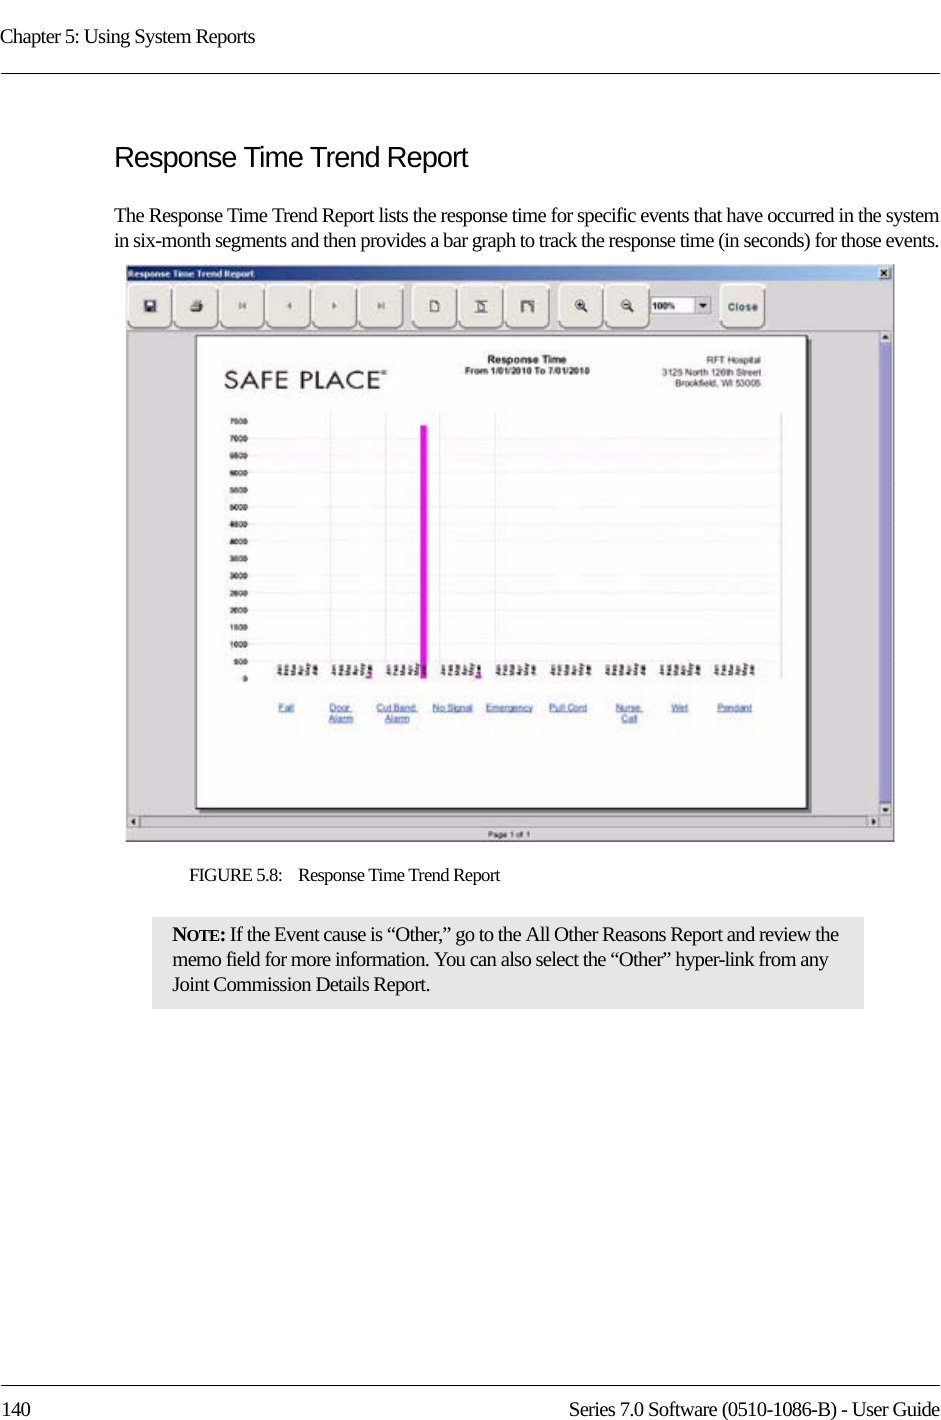 Chapter 5: Using System Reports140 Series 7.0 Software (0510-1086-B) - User GuideResponse Time Trend ReportThe Response Time Trend Report lists the response time for specific events that have occurred in the system in six-month segments and then provides a bar graph to track the response time (in seconds) for those events.FIGURE 5.8:    Response Time Trend ReportNOTE: If the Event cause is “Other,” go to the All Other Reasons Report and review the memo field for more information. You can also select the “Other” hyper-link from any Joint Commission Details Report.